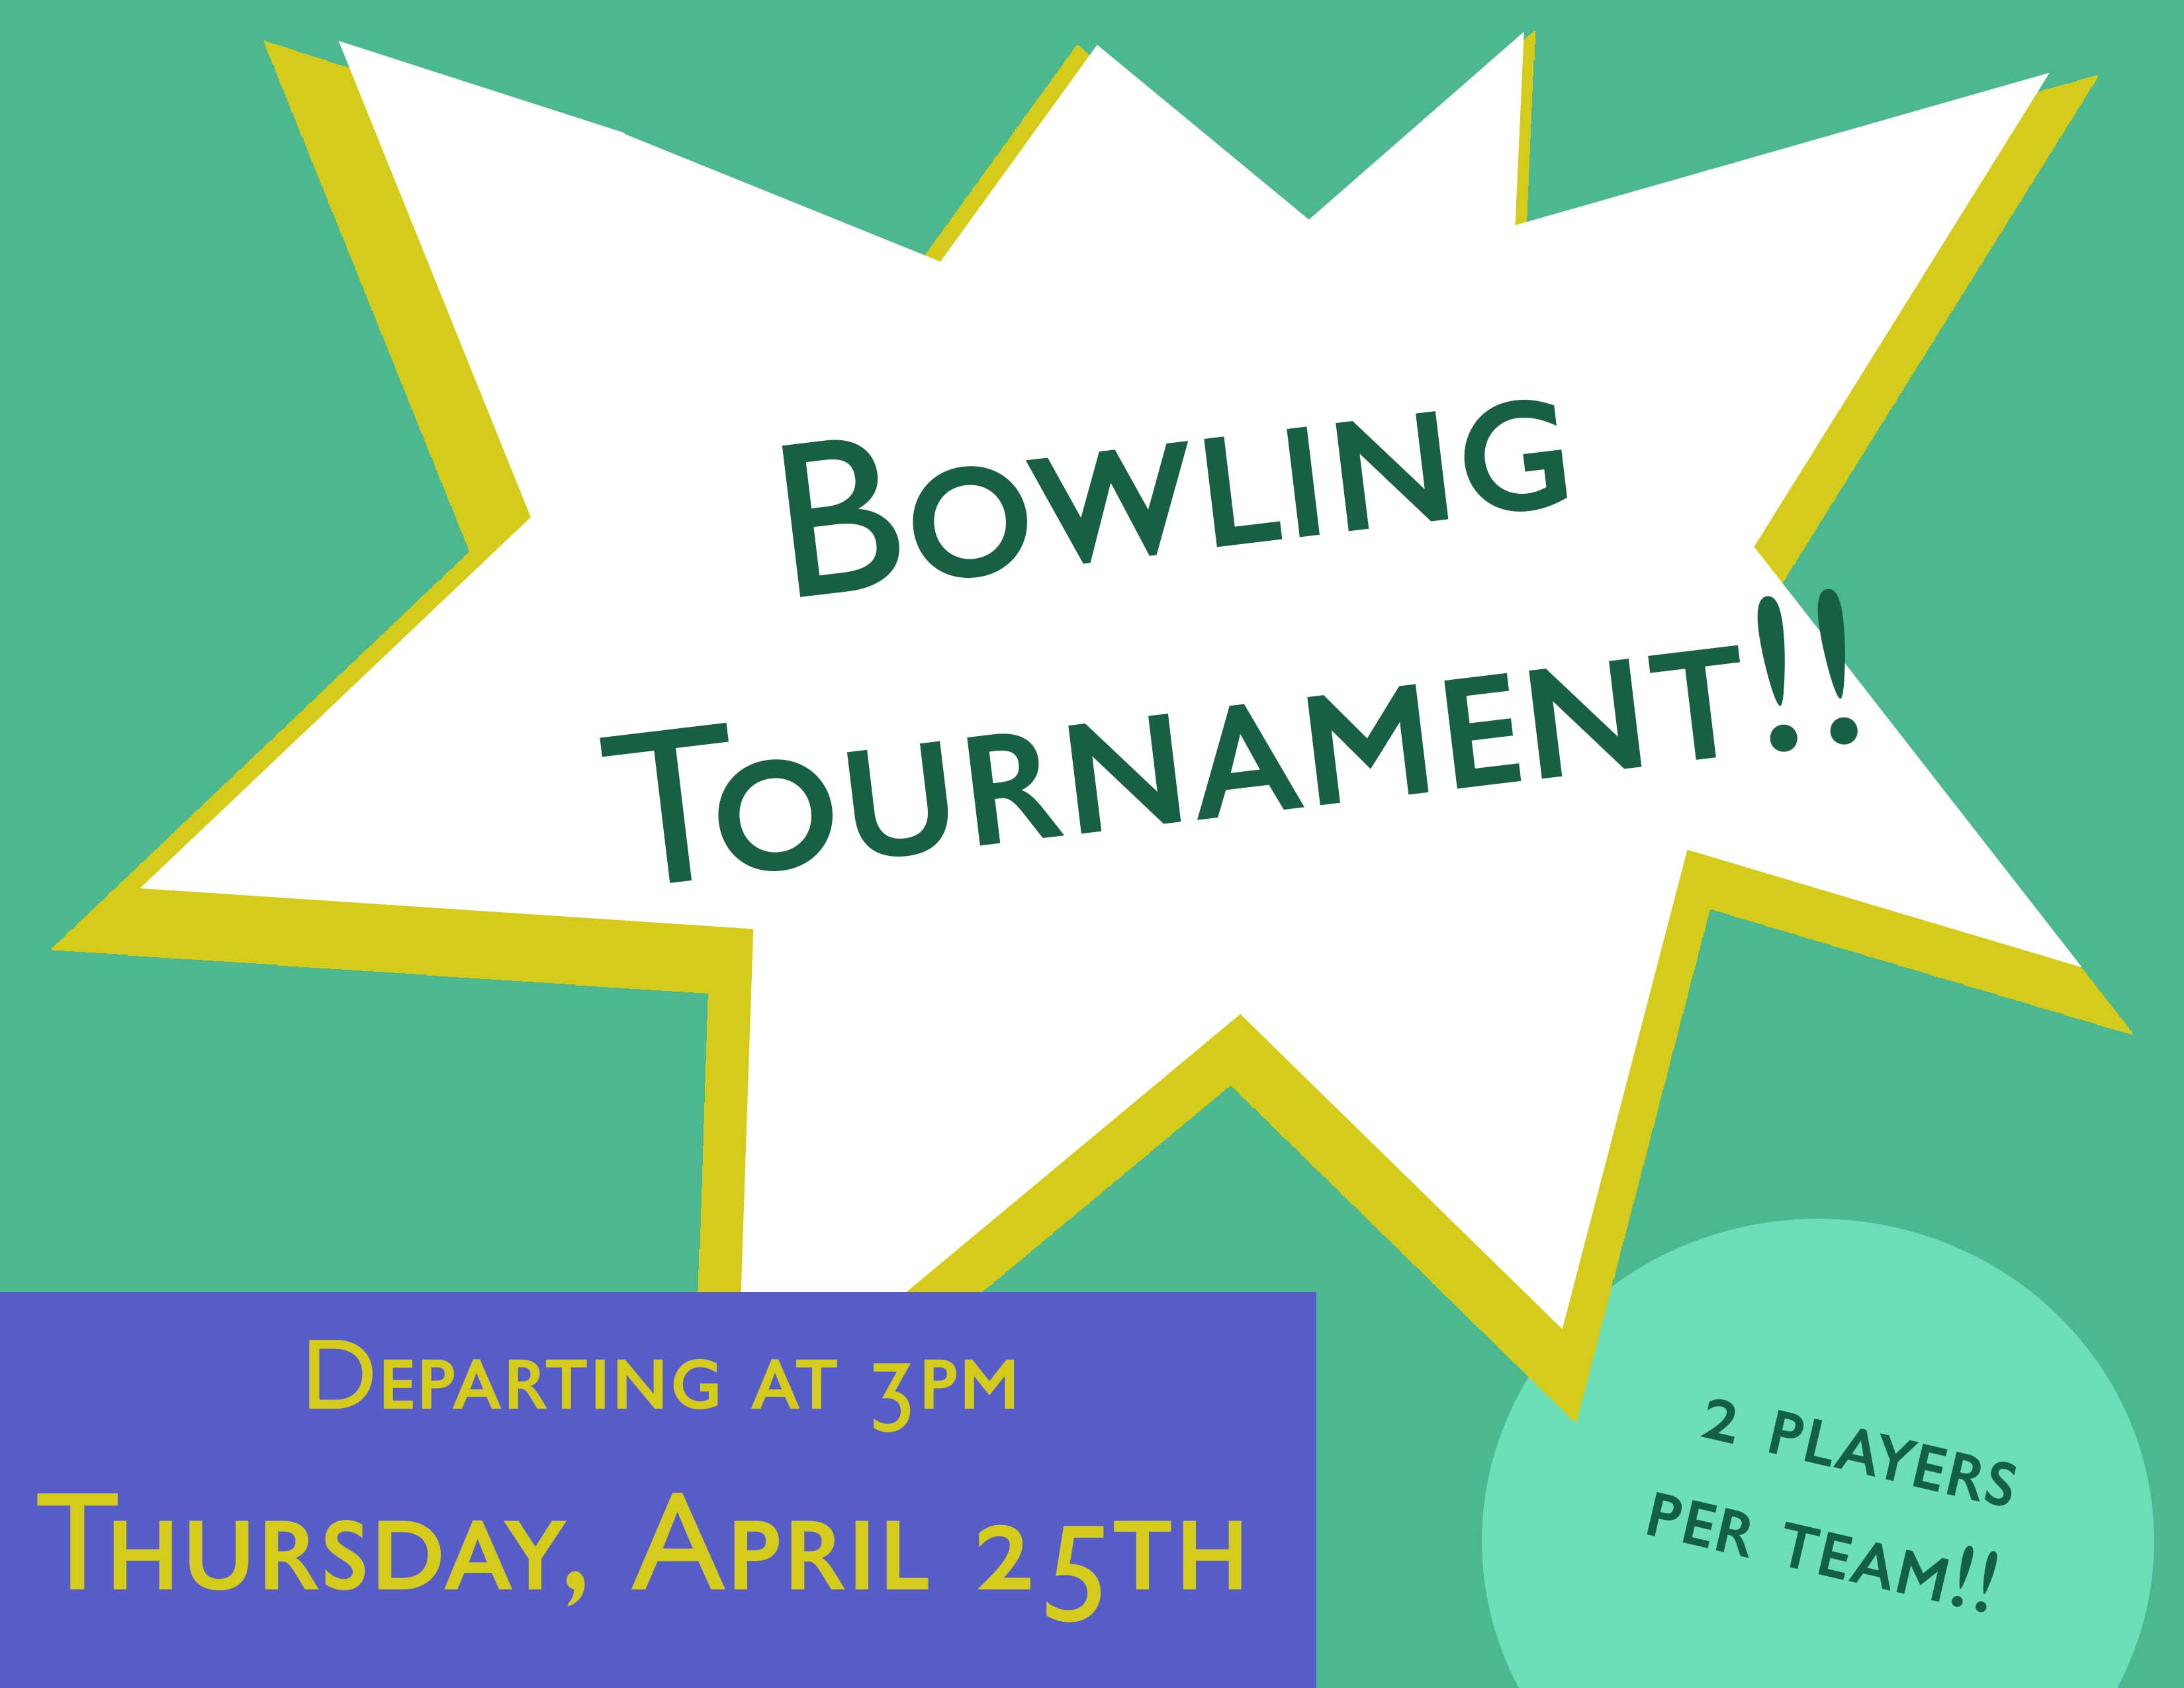 If anyone is interested in playing in the VTSU bowling tournament, please see the information below and contact Tim Barrett (tim.barrett@vermontstate.edu) or Chance Fee (cjf07130@vermontstate.edu).

2 players per team 

Thursday, April 25th | 5:00pm 

Transportation provided 

Departing around 3:00 pm